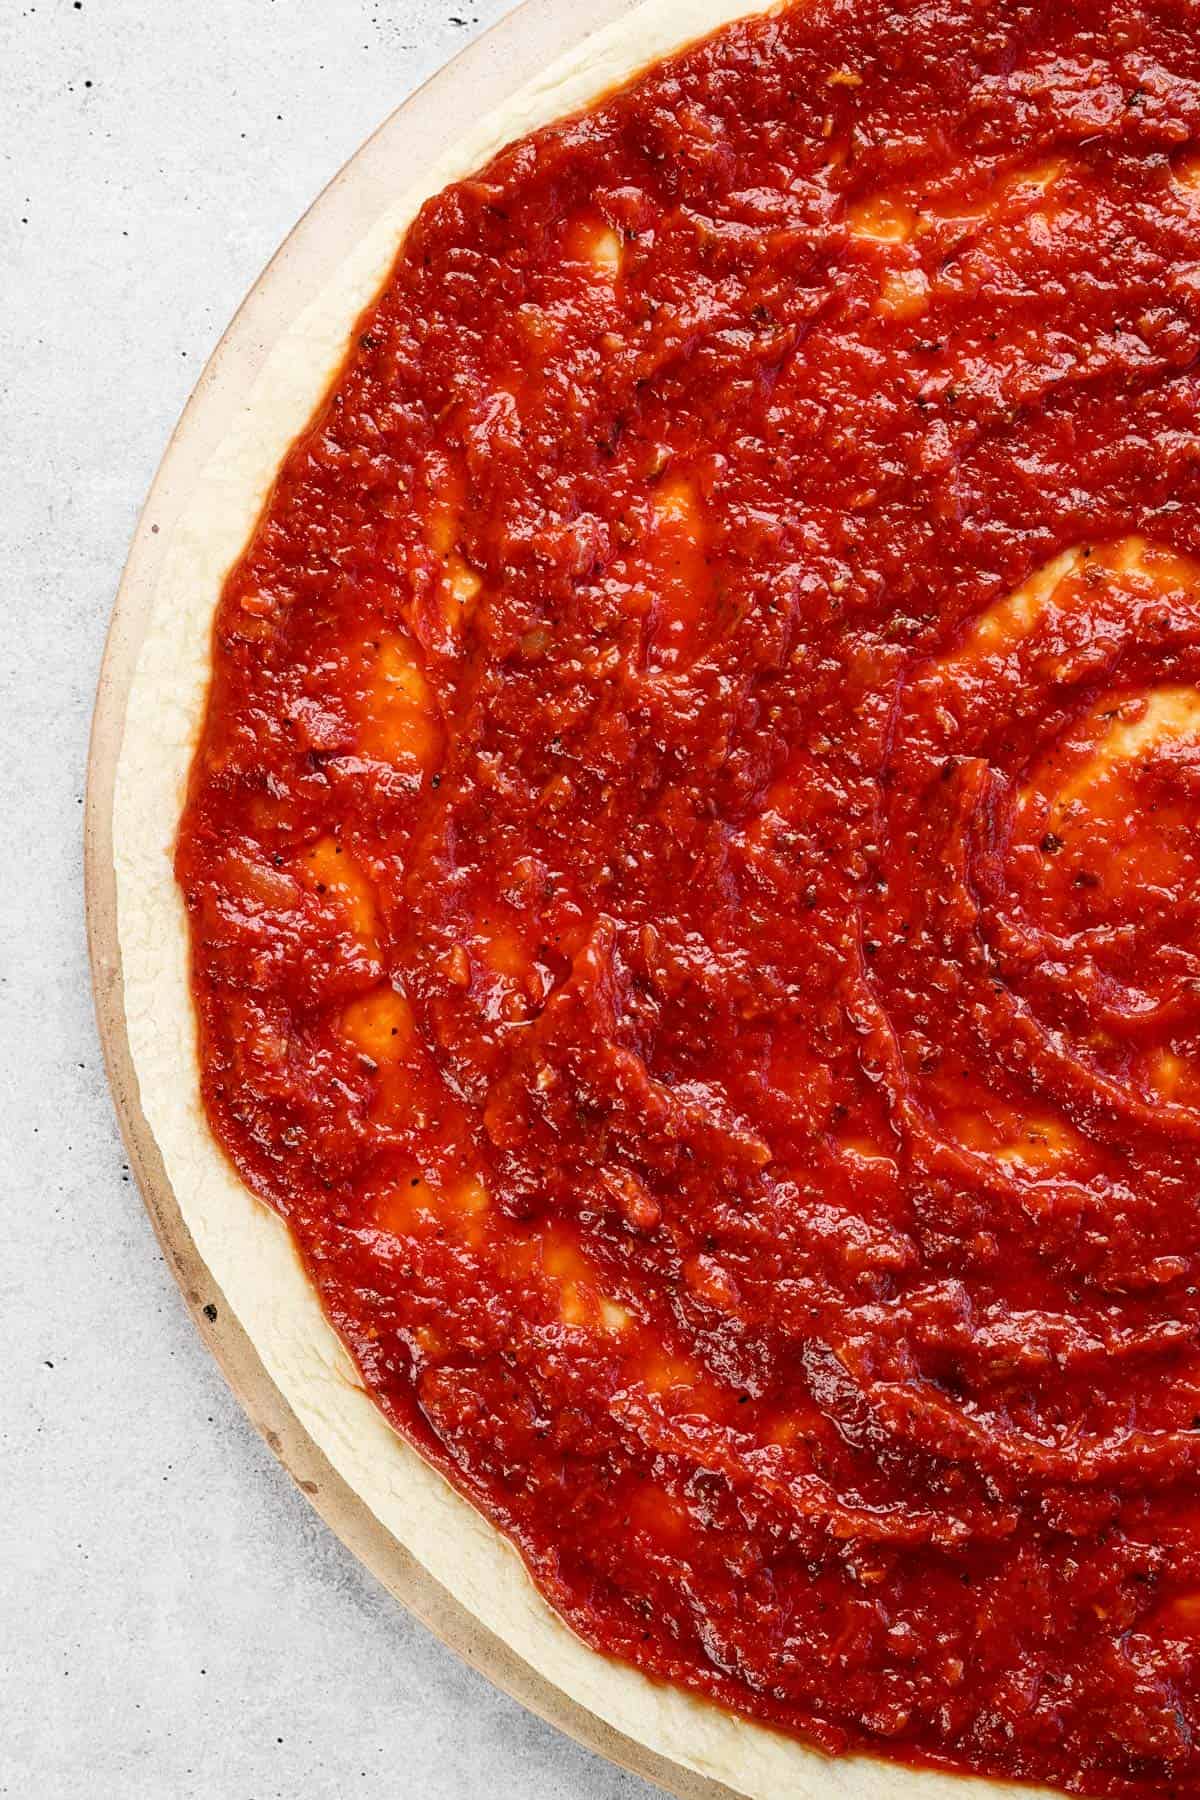 Sauce for pizza on a pizza dough.